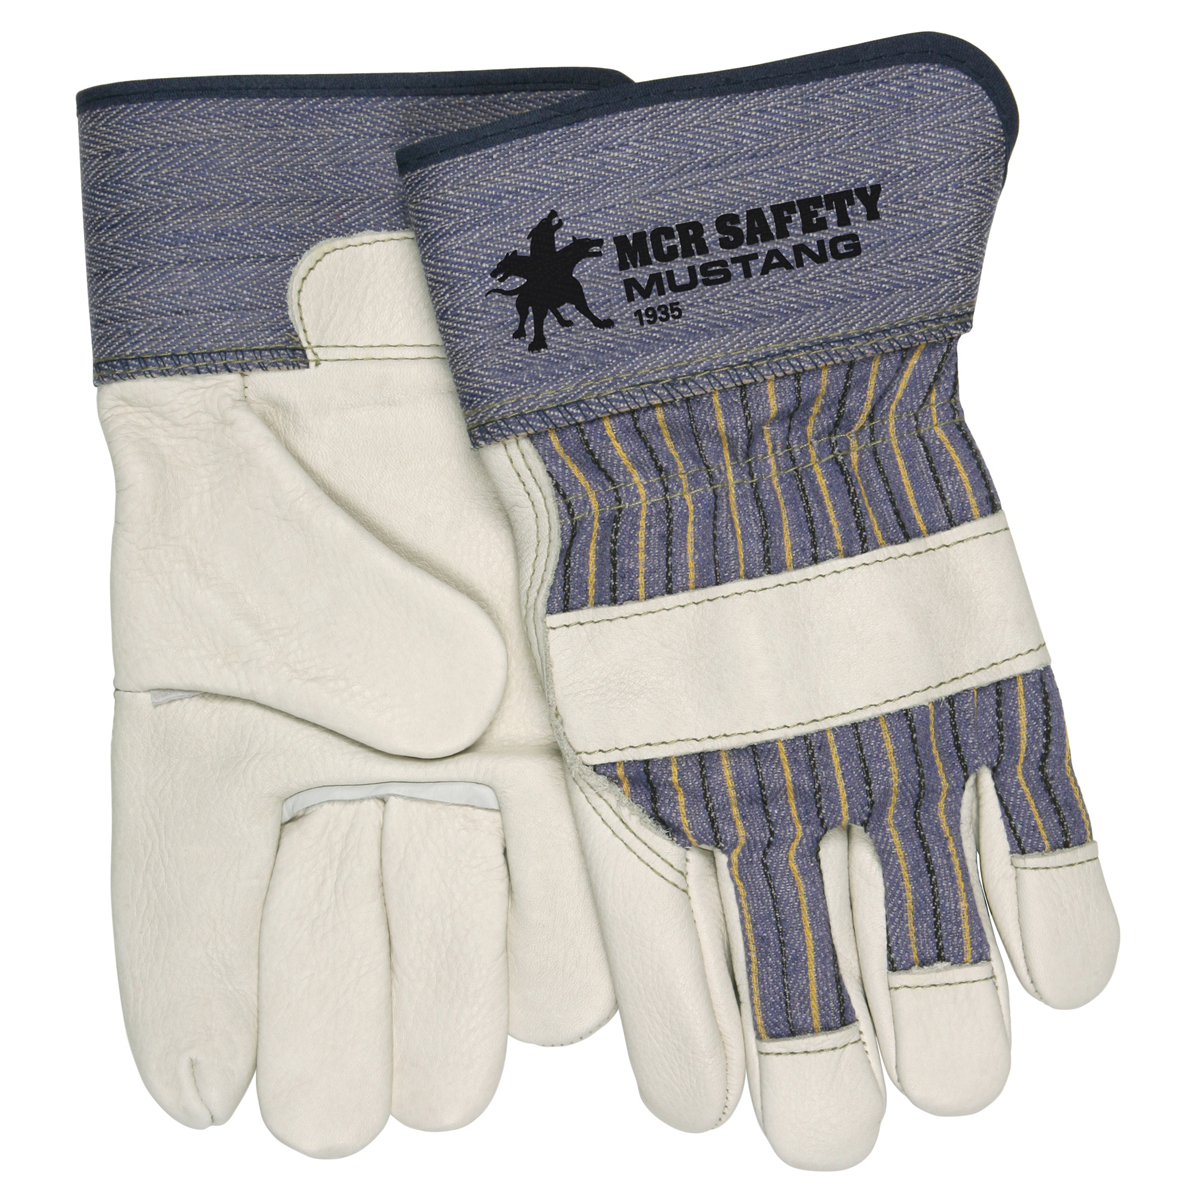 MCR Safety Large Blue, Yellow And Black Premium Grain Cowhide Palm Gloves With Fabric Back And Rubberized Safety Cuff